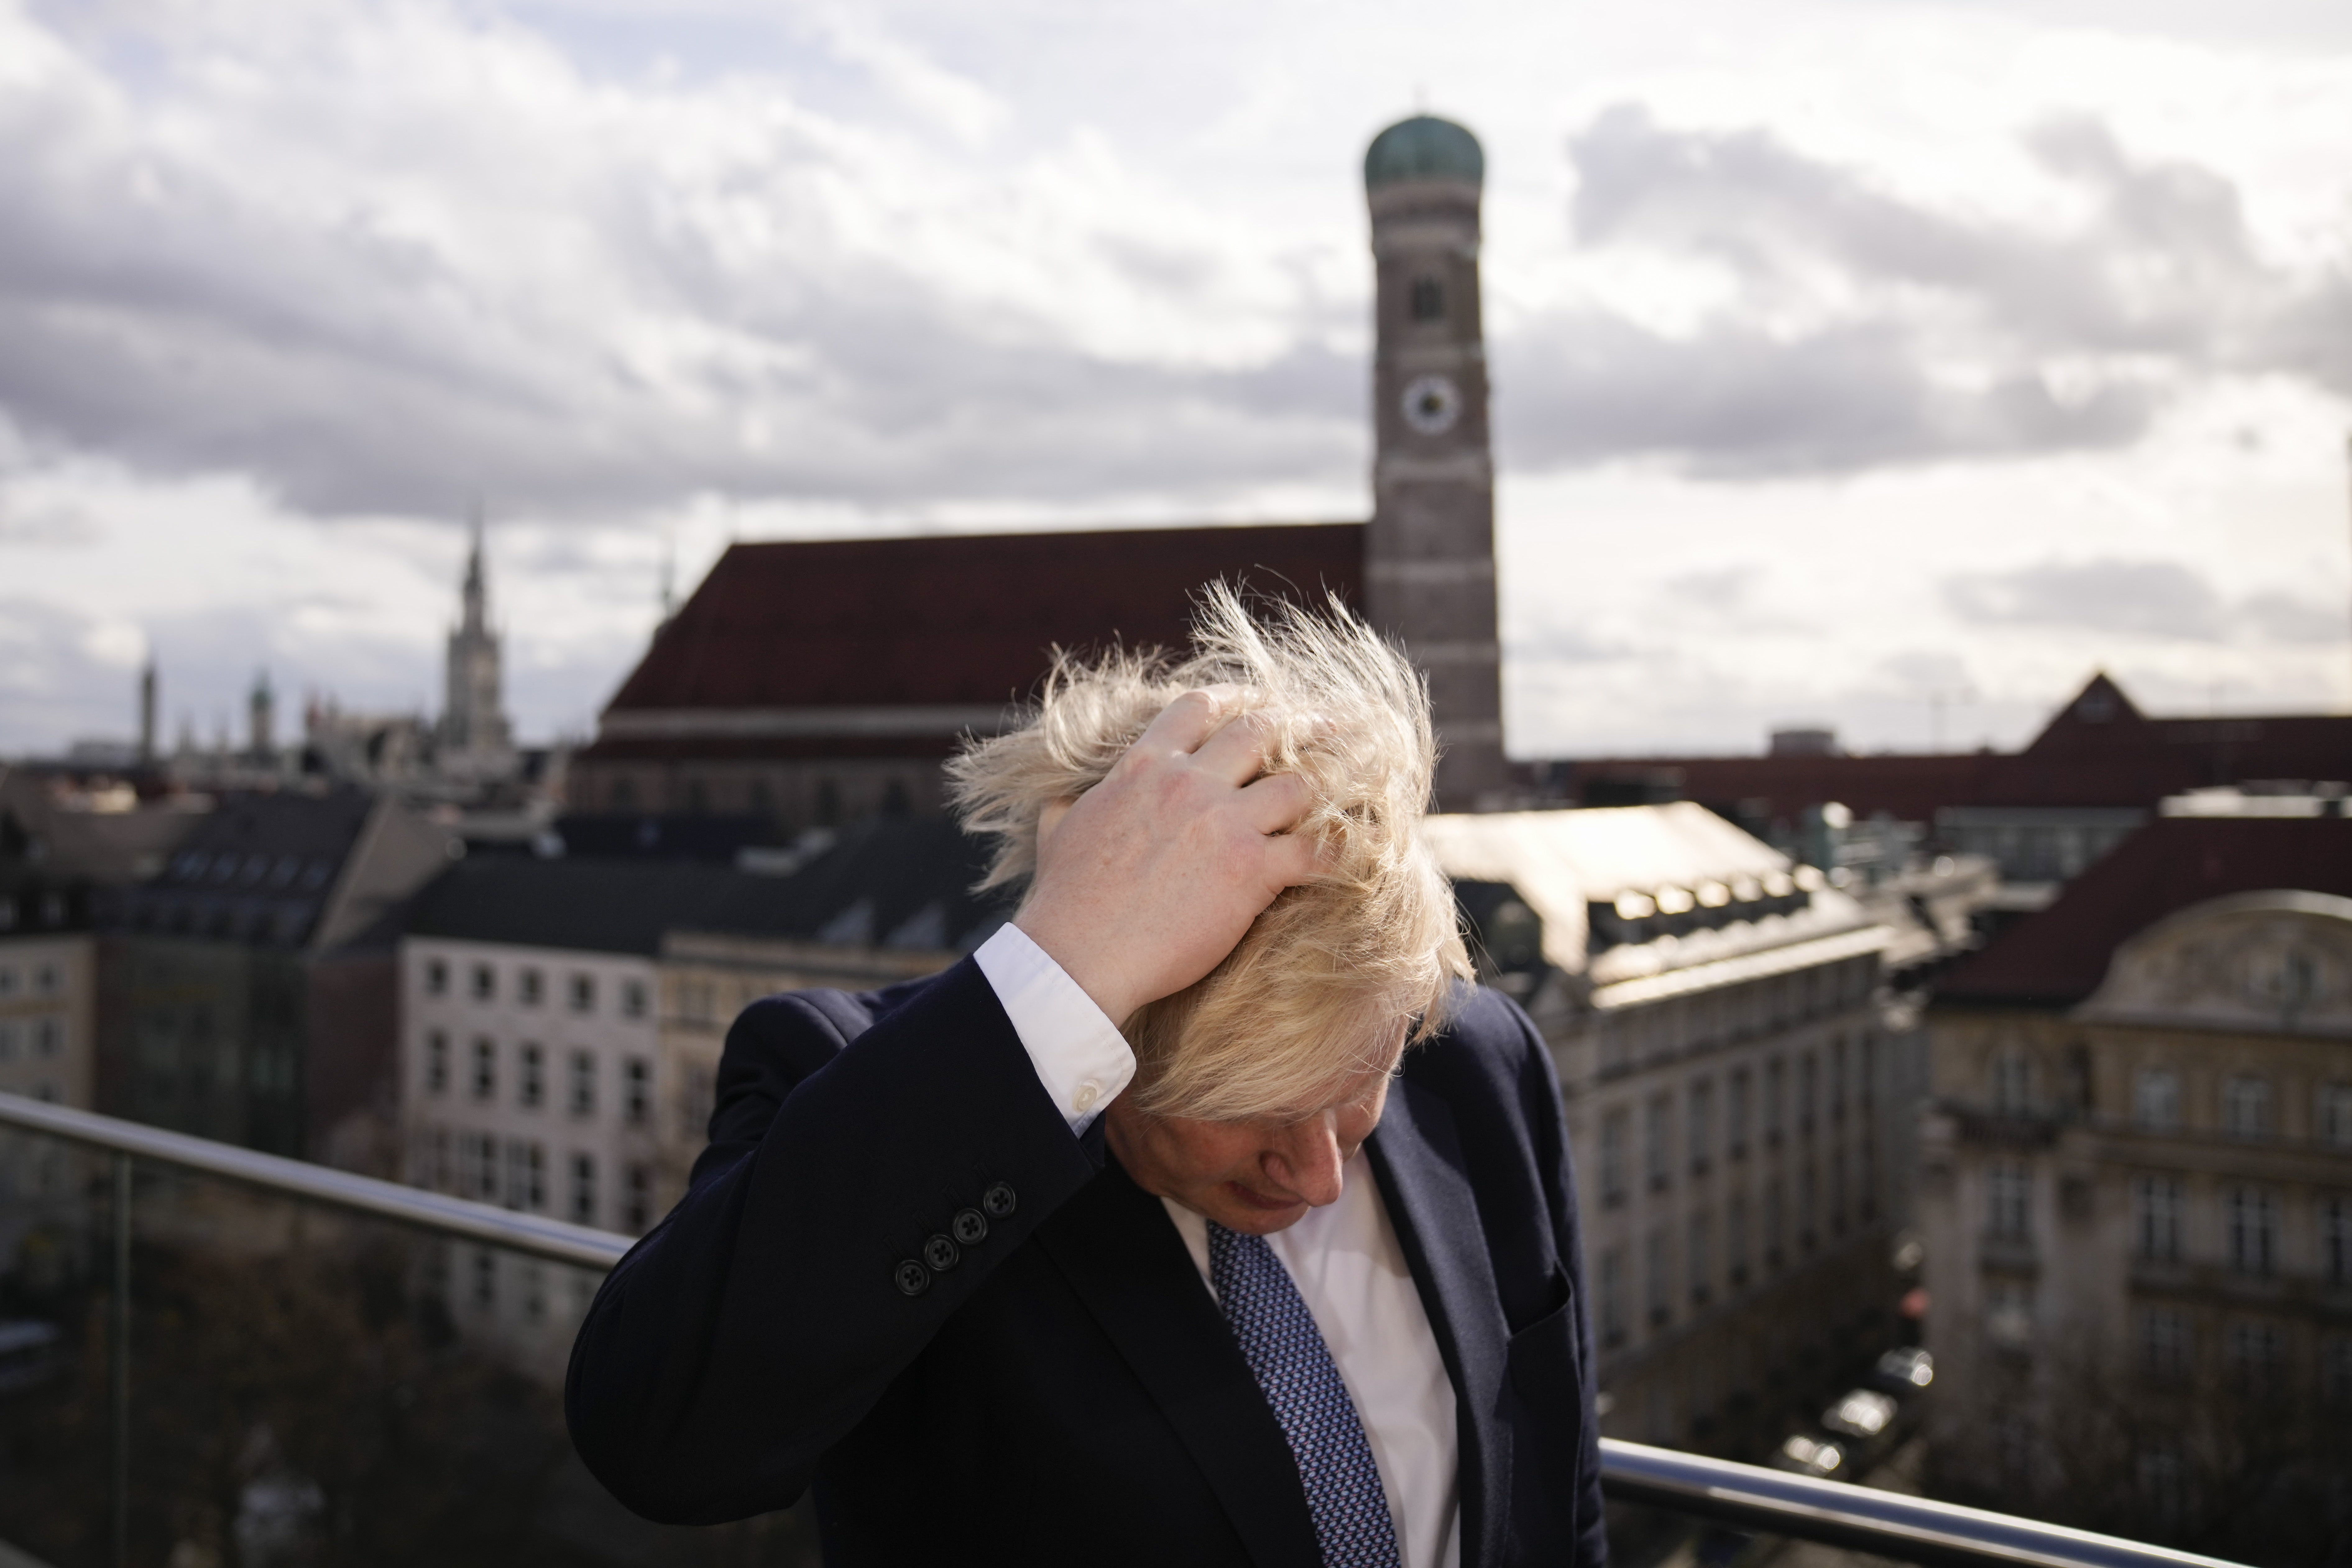 Prime Minister Boris Johnson rubbing his hair to get ready for a interview during the Munich Security Conference in Germany. (Matt Dunham/PA)